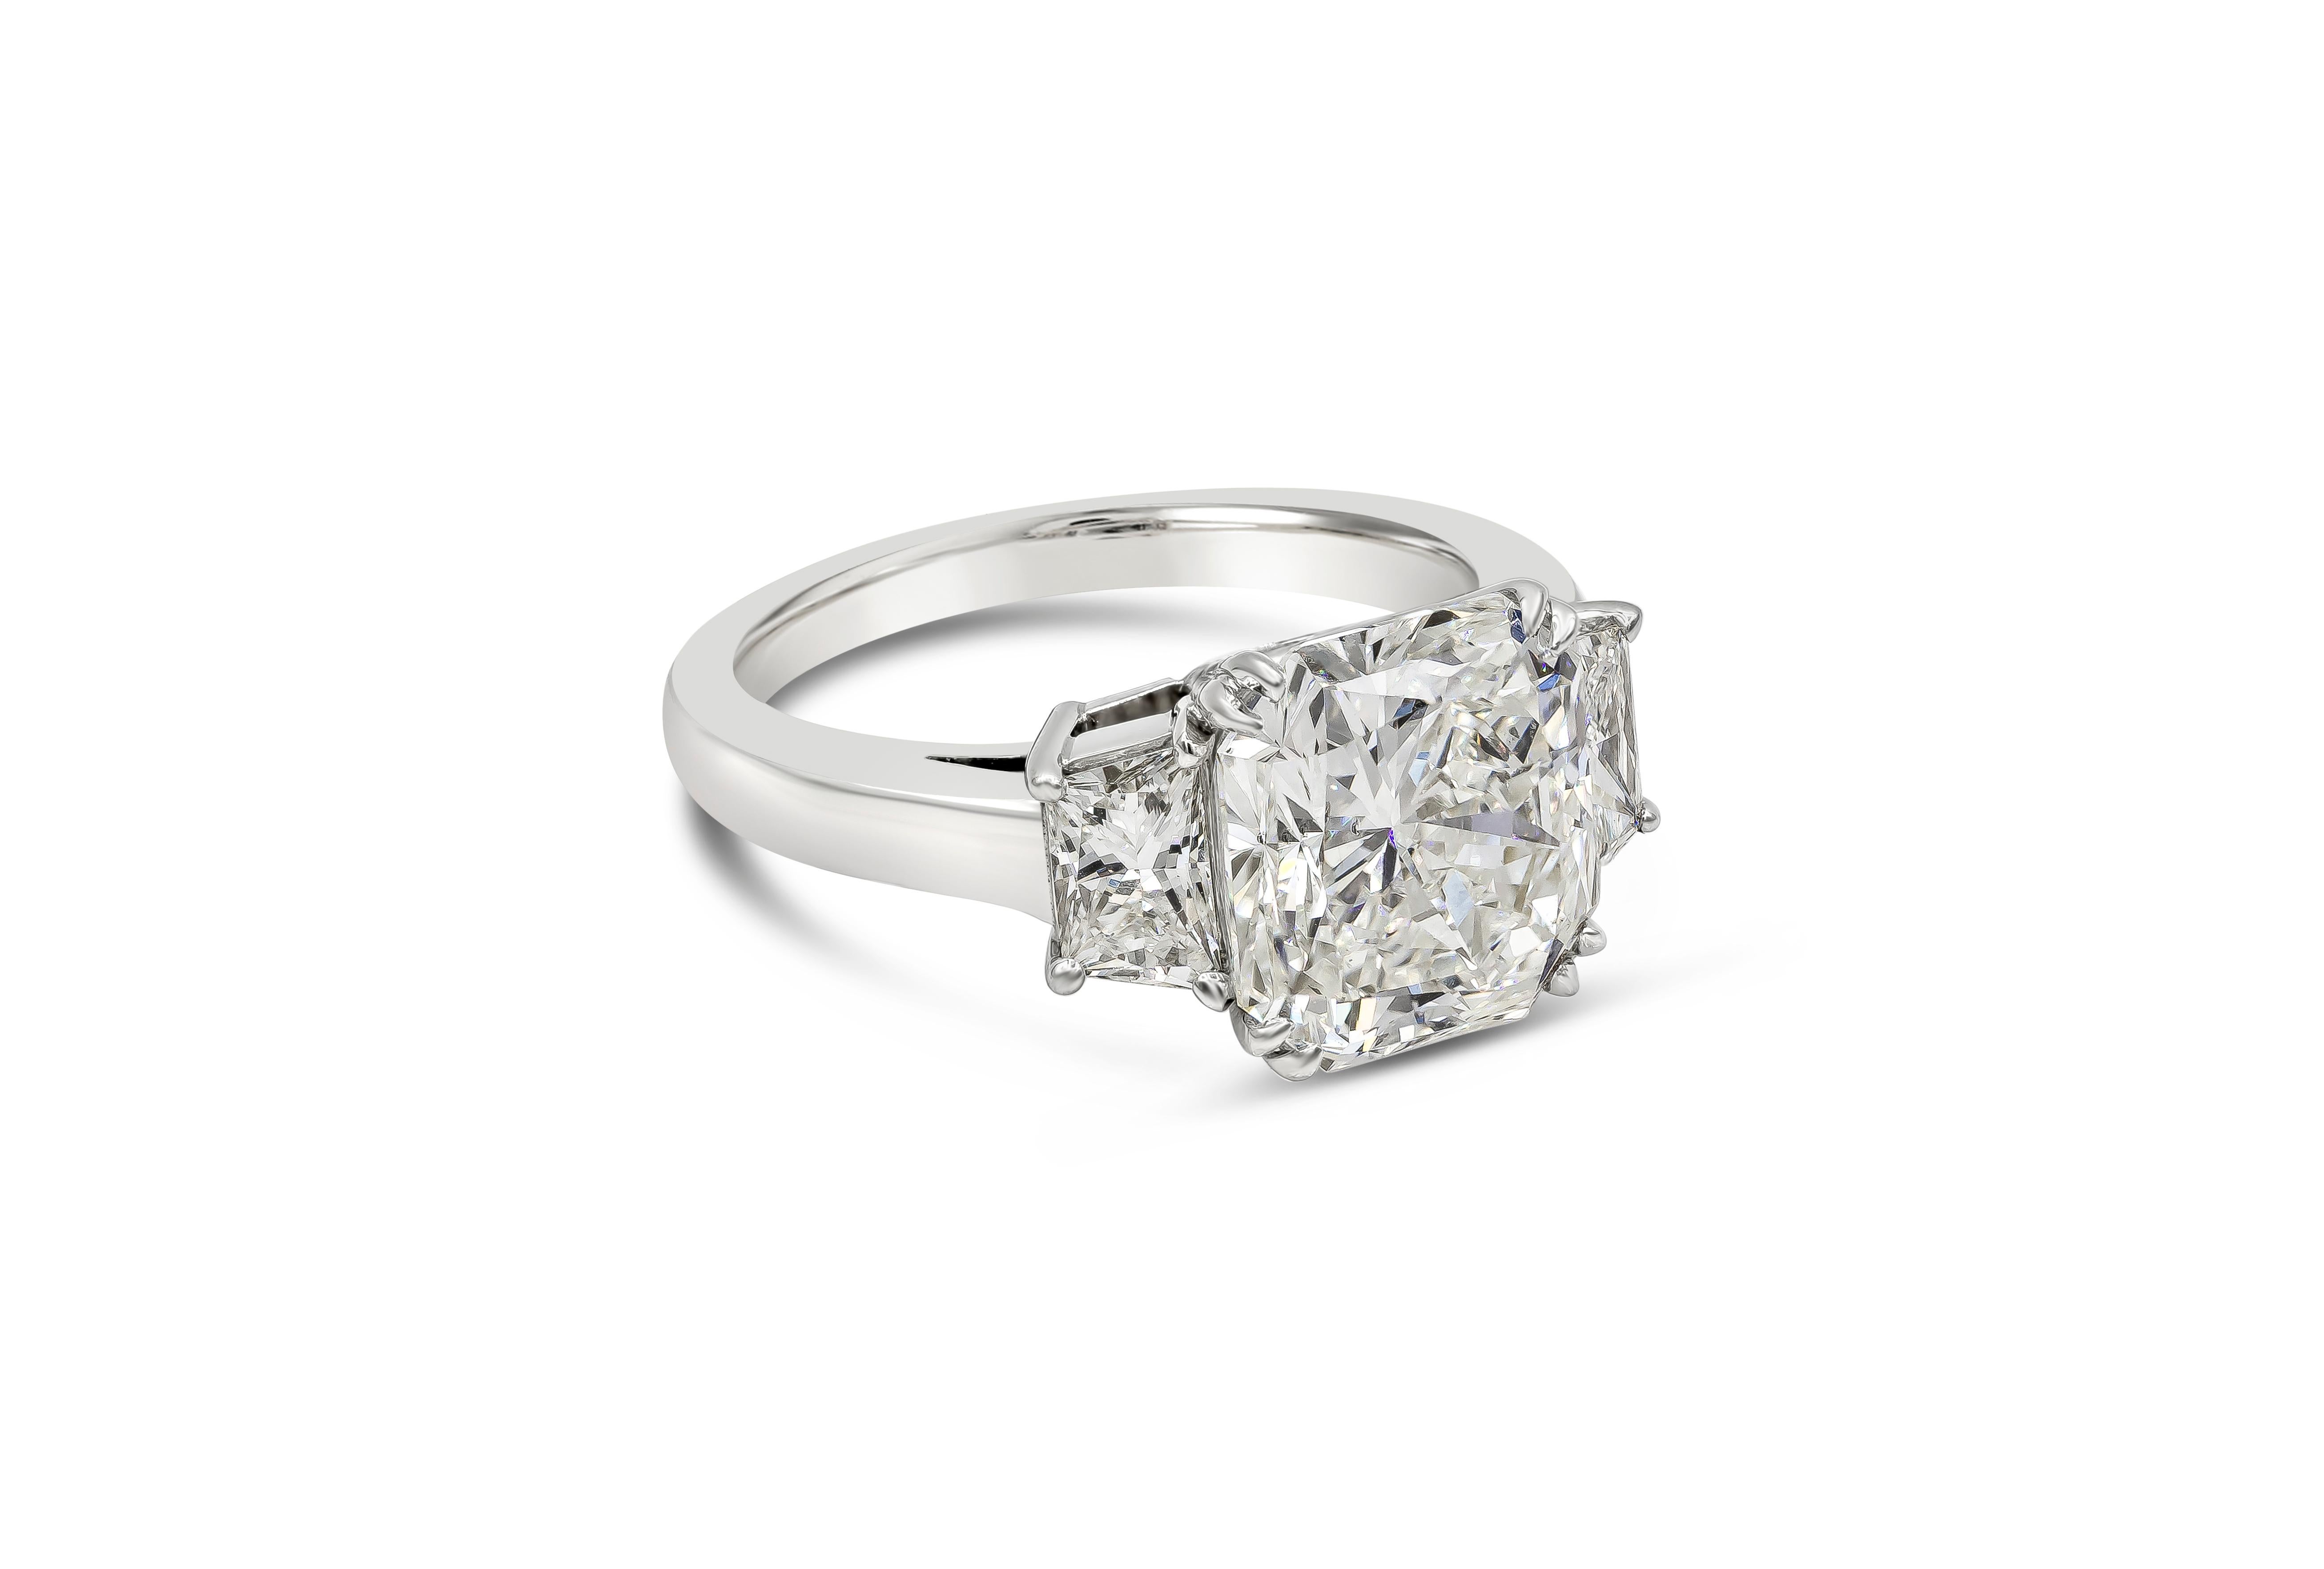 A timeless classic showcasing a GIA Certified 5.24 carat total radiant cut I Color and SI1 in Clarity. Flanking the center stone are two perfectly-matched brilliant trapezoid diamonds weighing 1.02 carats total. Made with Platinum. Size 6.25